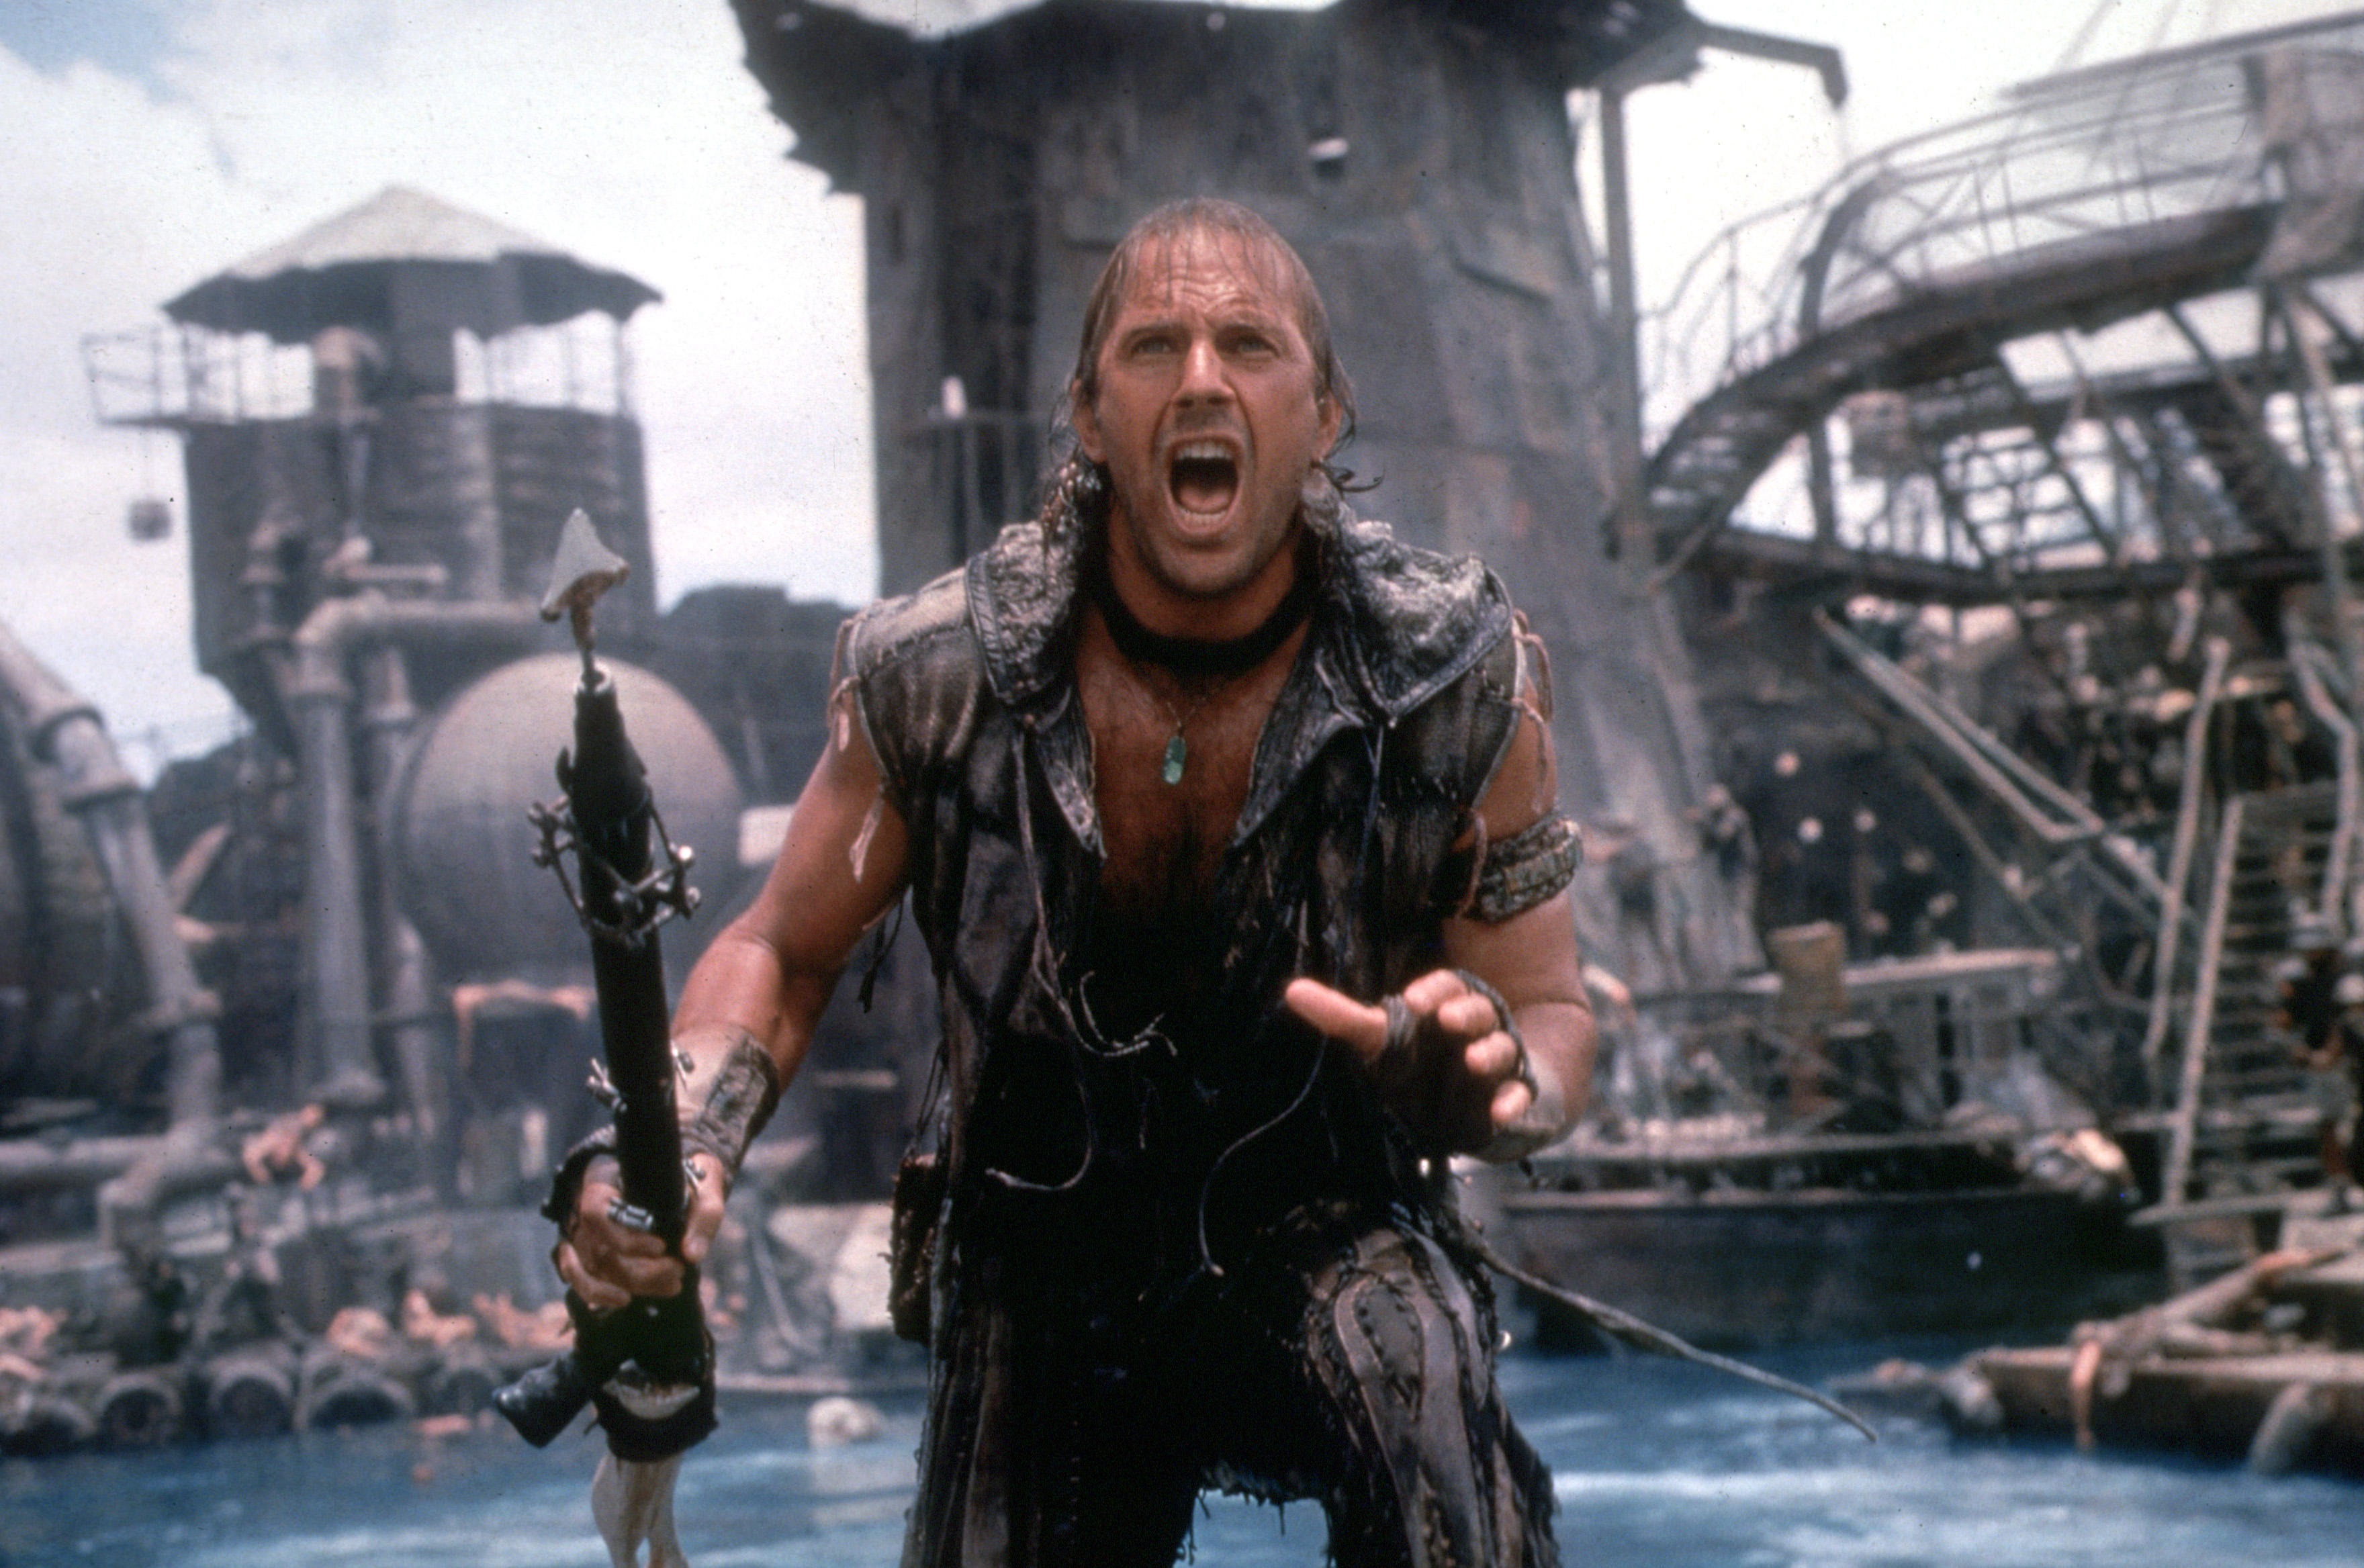 Kevin Costner stands with a harpoon in a floating industrial city